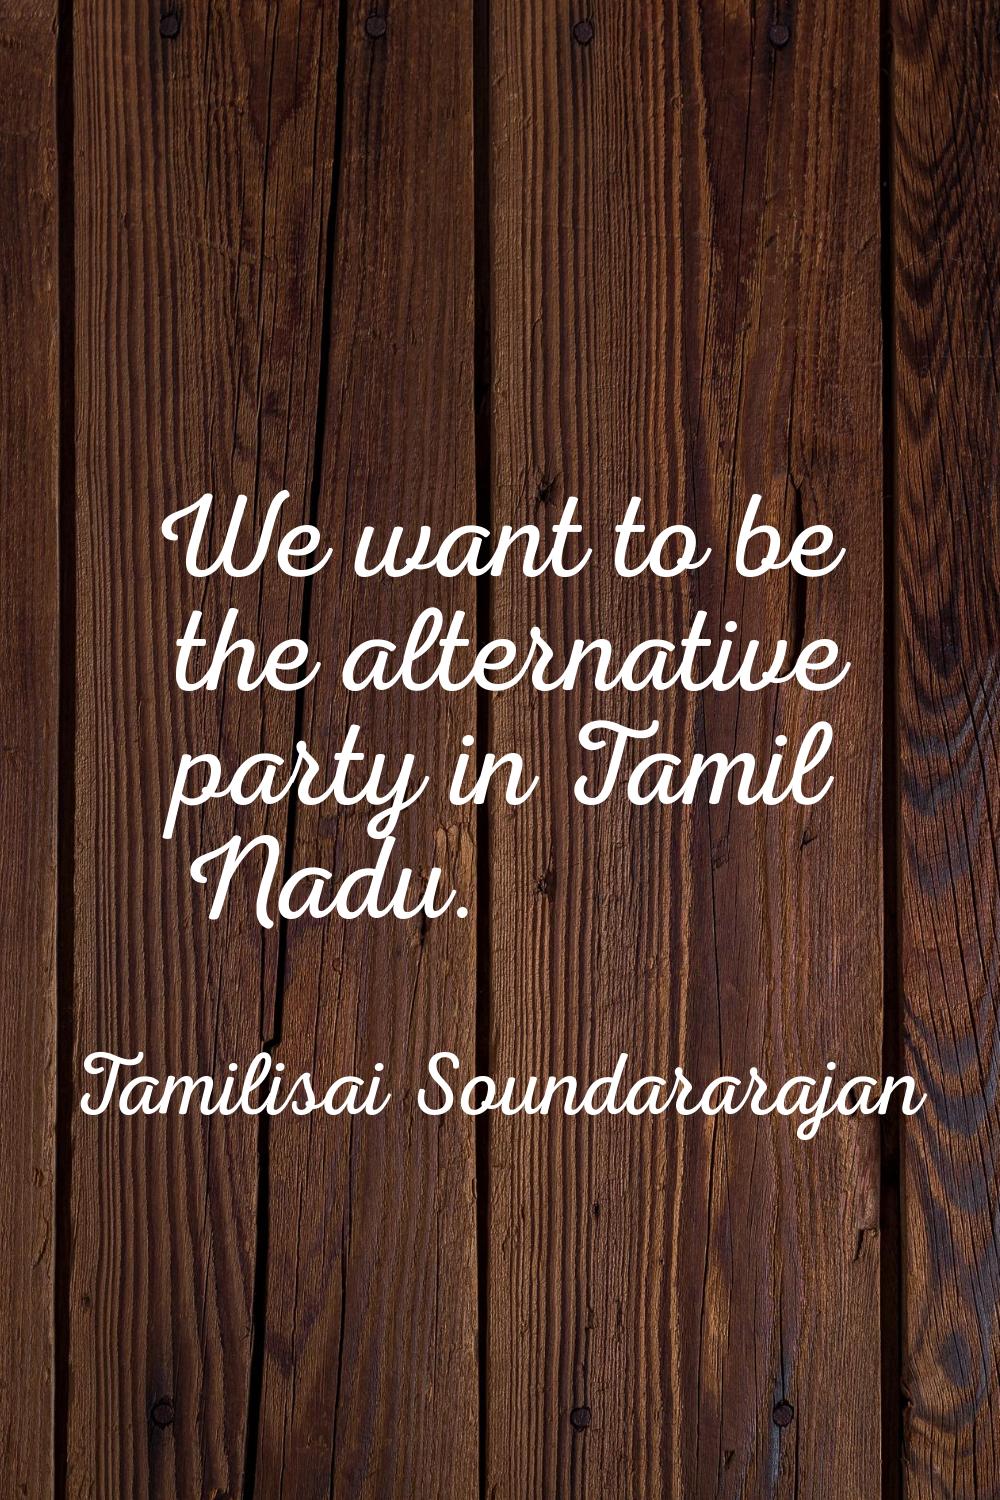 We want to be the alternative party in Tamil Nadu.